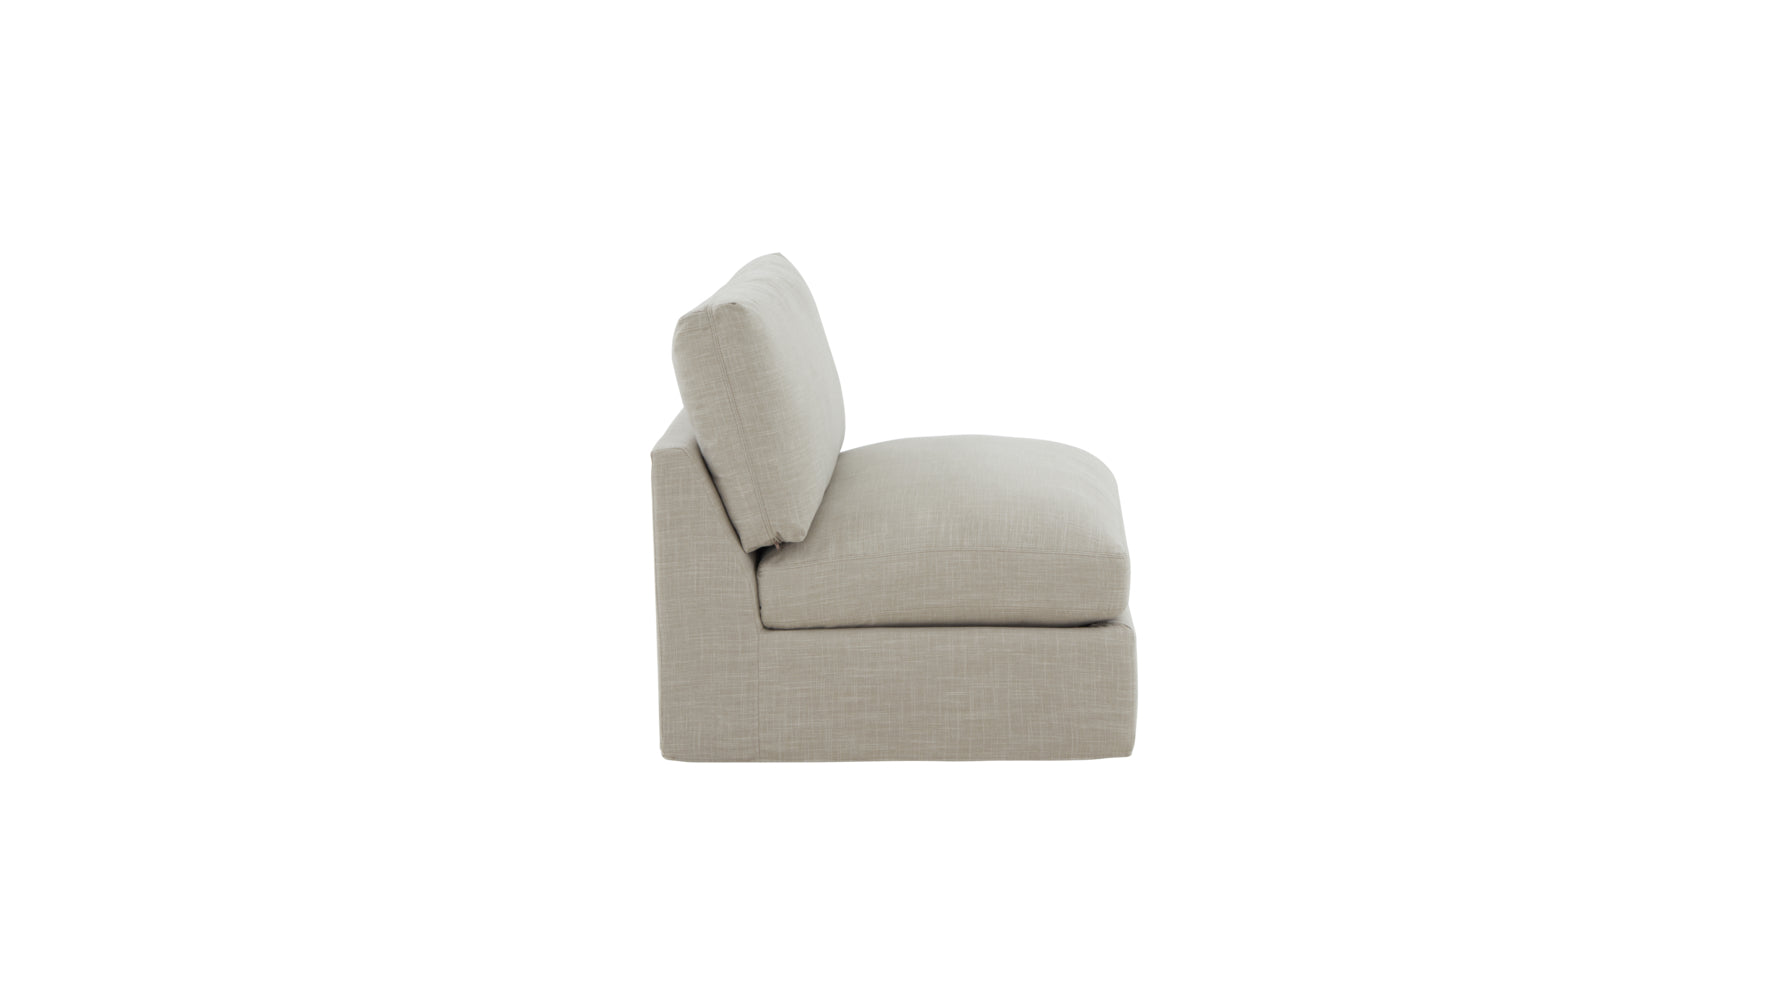 Get Together™ Armless Chair, Standard, Light Pebble - Image 7